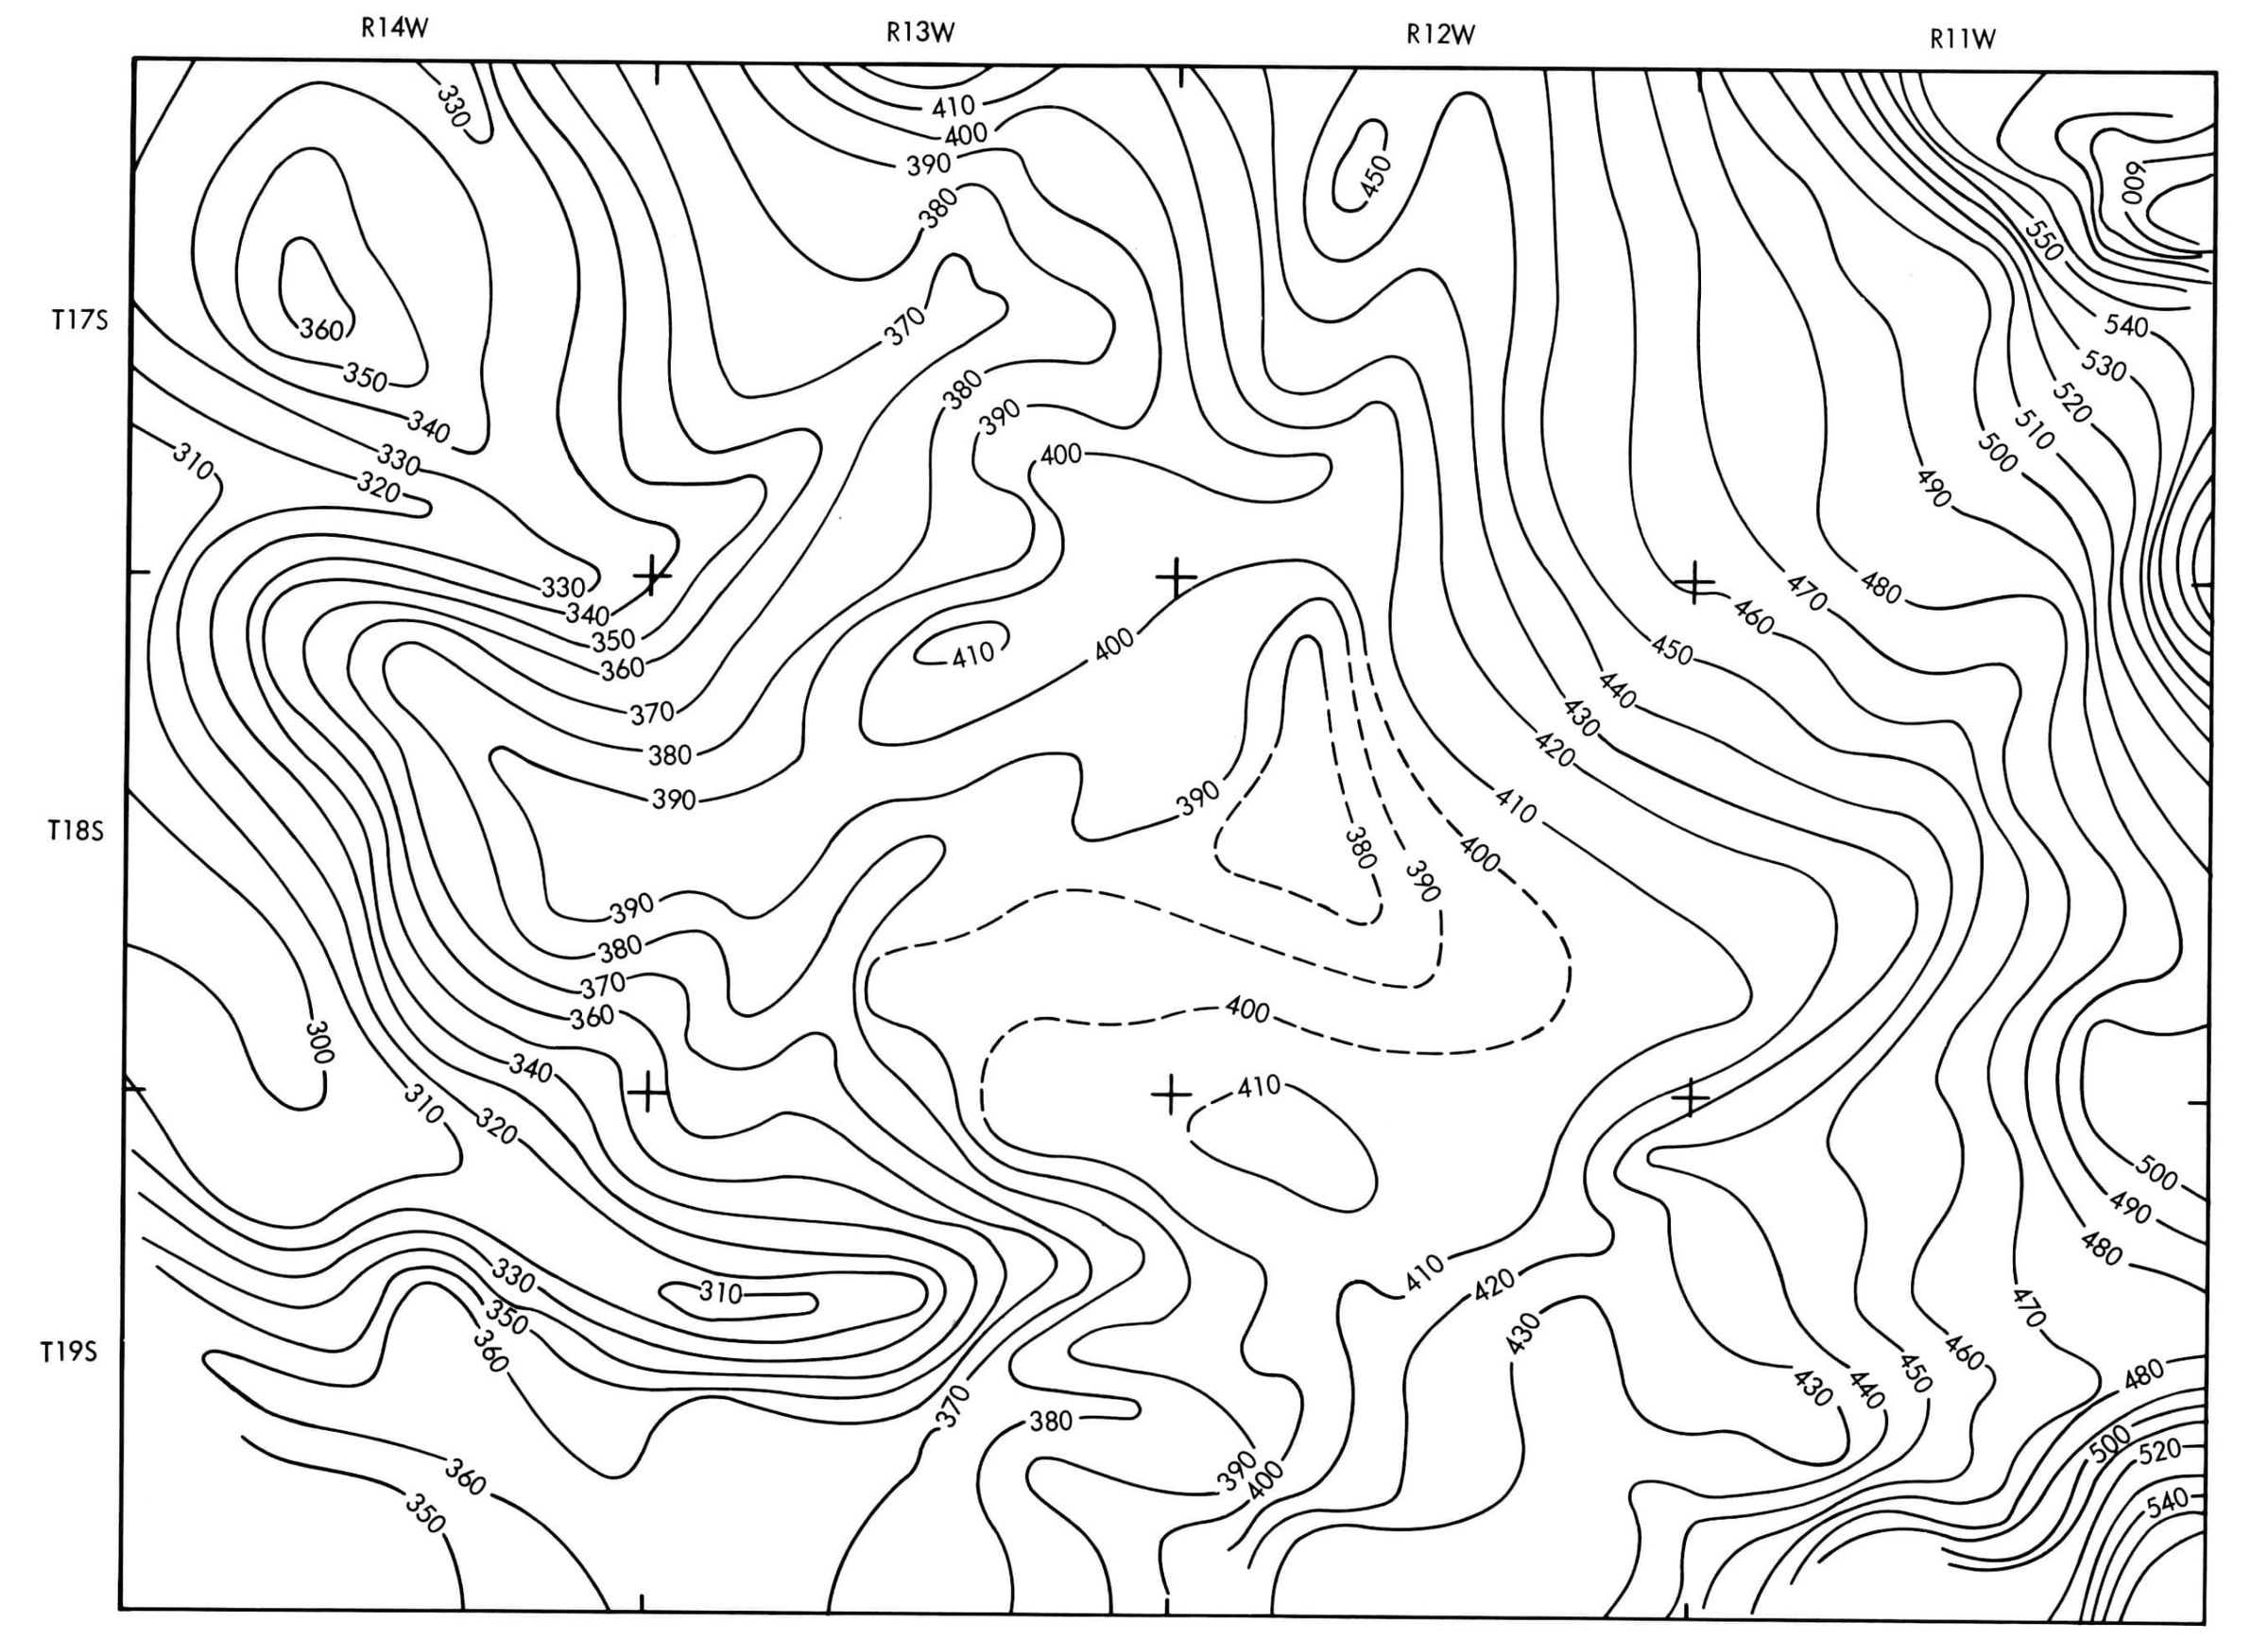 How to Determine the Contour Interval on a Topographic Map?